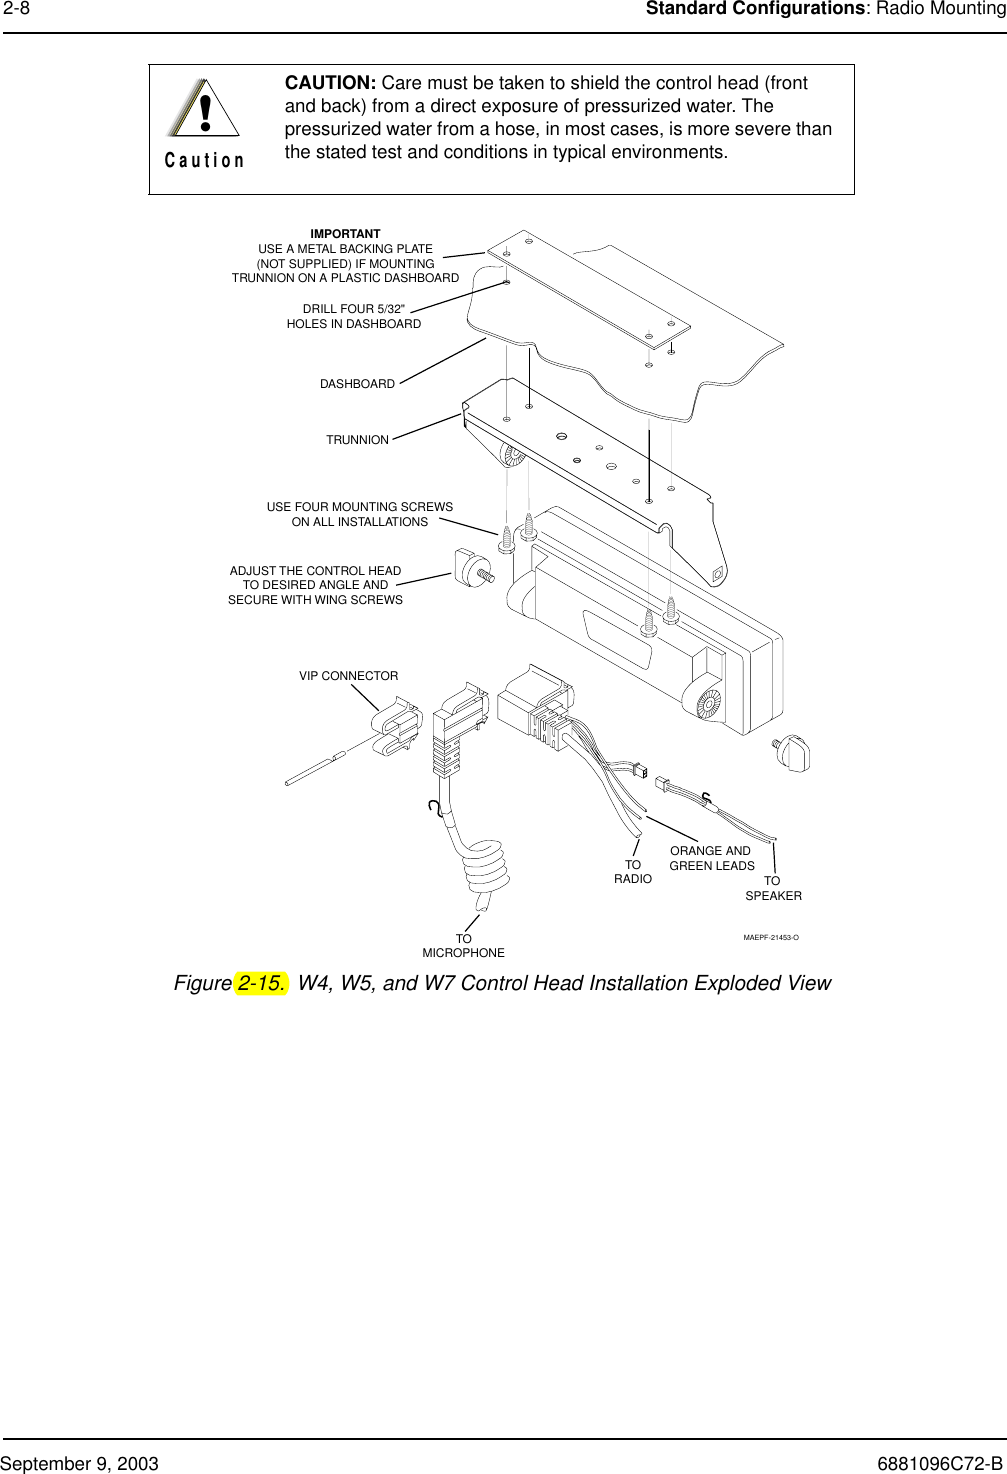 September 9, 2003 6881096C72-B2-8 Standard Configurations: Radio Mounting Figure 2-15.  W4, W5, and W7 Control Head Installation Exploded ViewCAUTION: Care must be taken to shield the control head (front and back) from a direct exposure of pressurized water. The pressurized water from a hose, in most cases, is more severe than the stated test and conditions in typical environments.!C a u t i o nIMPORTANTUSE A METAL BACKING PLATE(NOT SUPPLIED) IF MOUNTINGTRUNNION ON A PLASTIC DASHBOARDDRILL FOUR 5/32&quot;HOLES IN DASHBOARDDASHBOARDTRUNNION03-00136756USE FOUR MOUNTING SCREWSON ALL INSTALLATIONSADJUST THE CONTROL HEADTO DESIRED ANGLE ANDSECURE WITH WING SCREWSVIP CONNECTORTOMICROPHONETO SPEAKERTORADIOORANGE AND GREEN LEADSMAEPF-21453-O